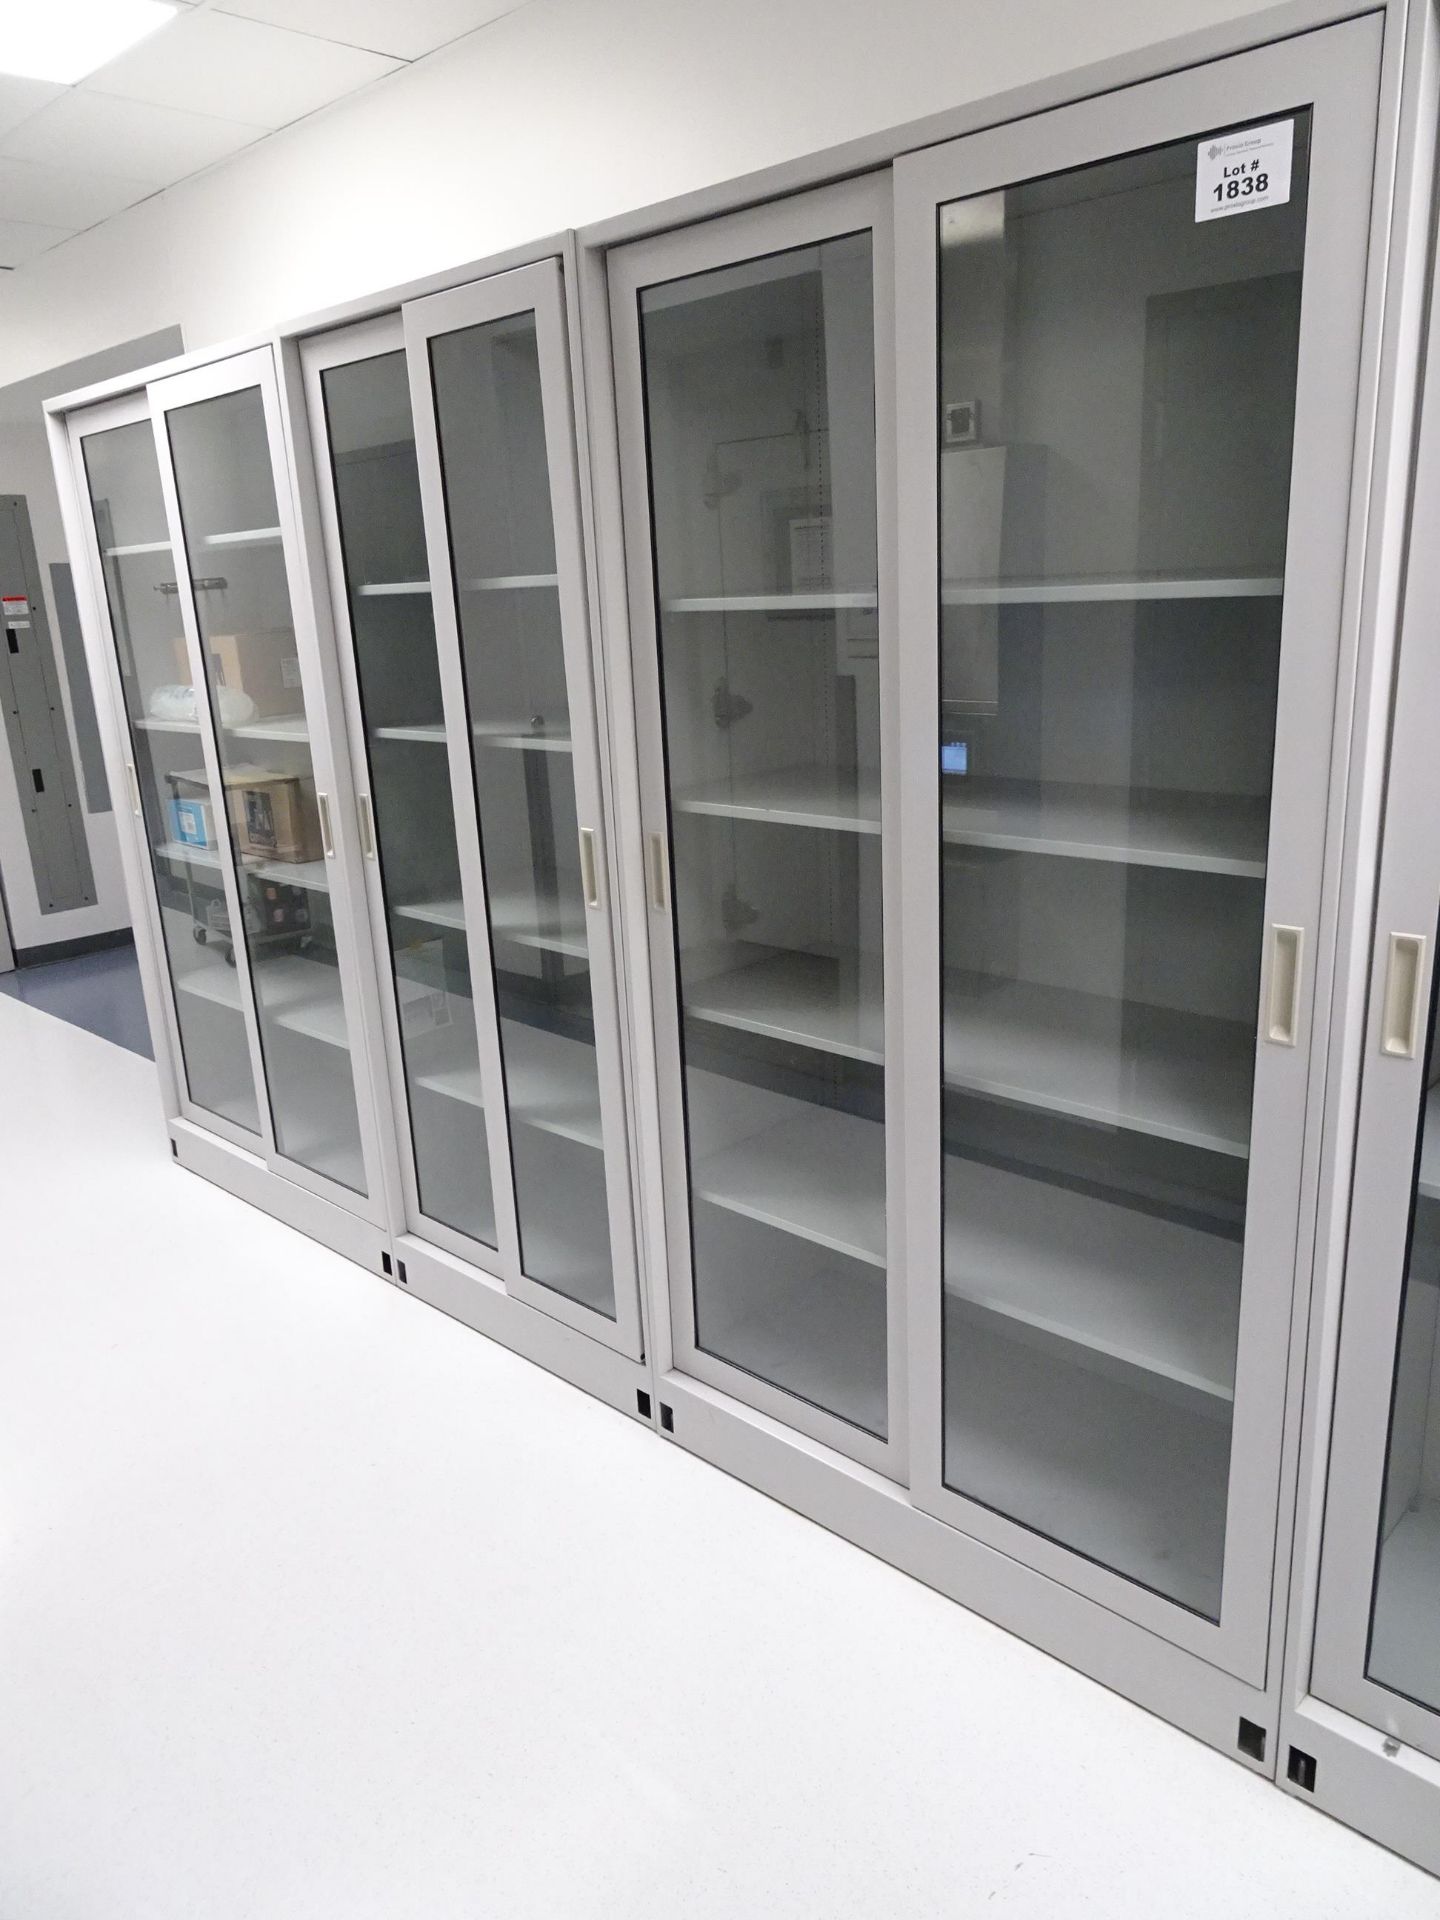 3-Section of storage Cabinets - Image 2 of 5